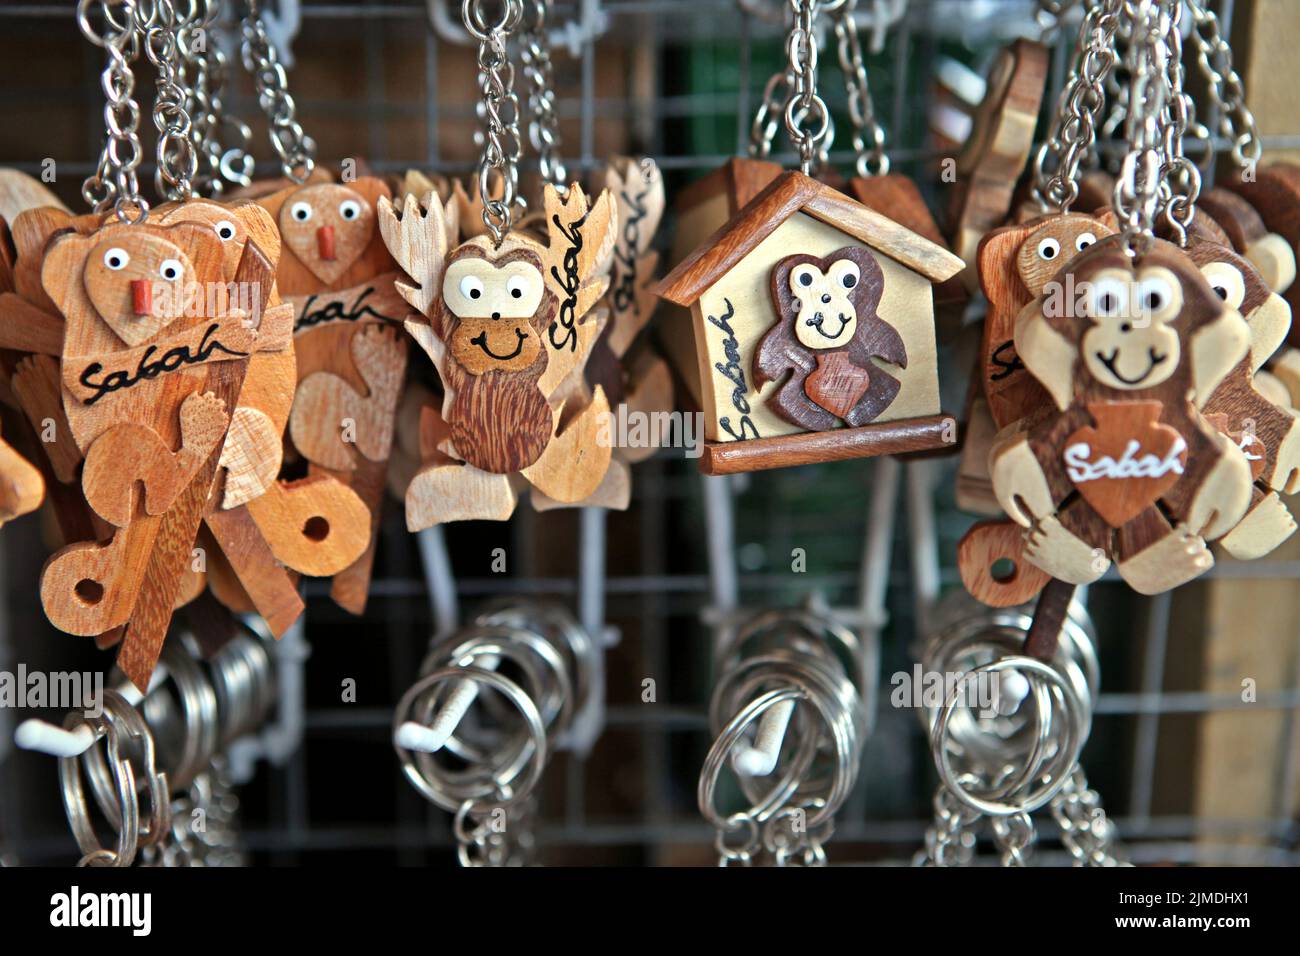 Souvenirs at a shop on the side of a road leading to Kinabalu Park in Sabah, Malaysia. Stock Photo